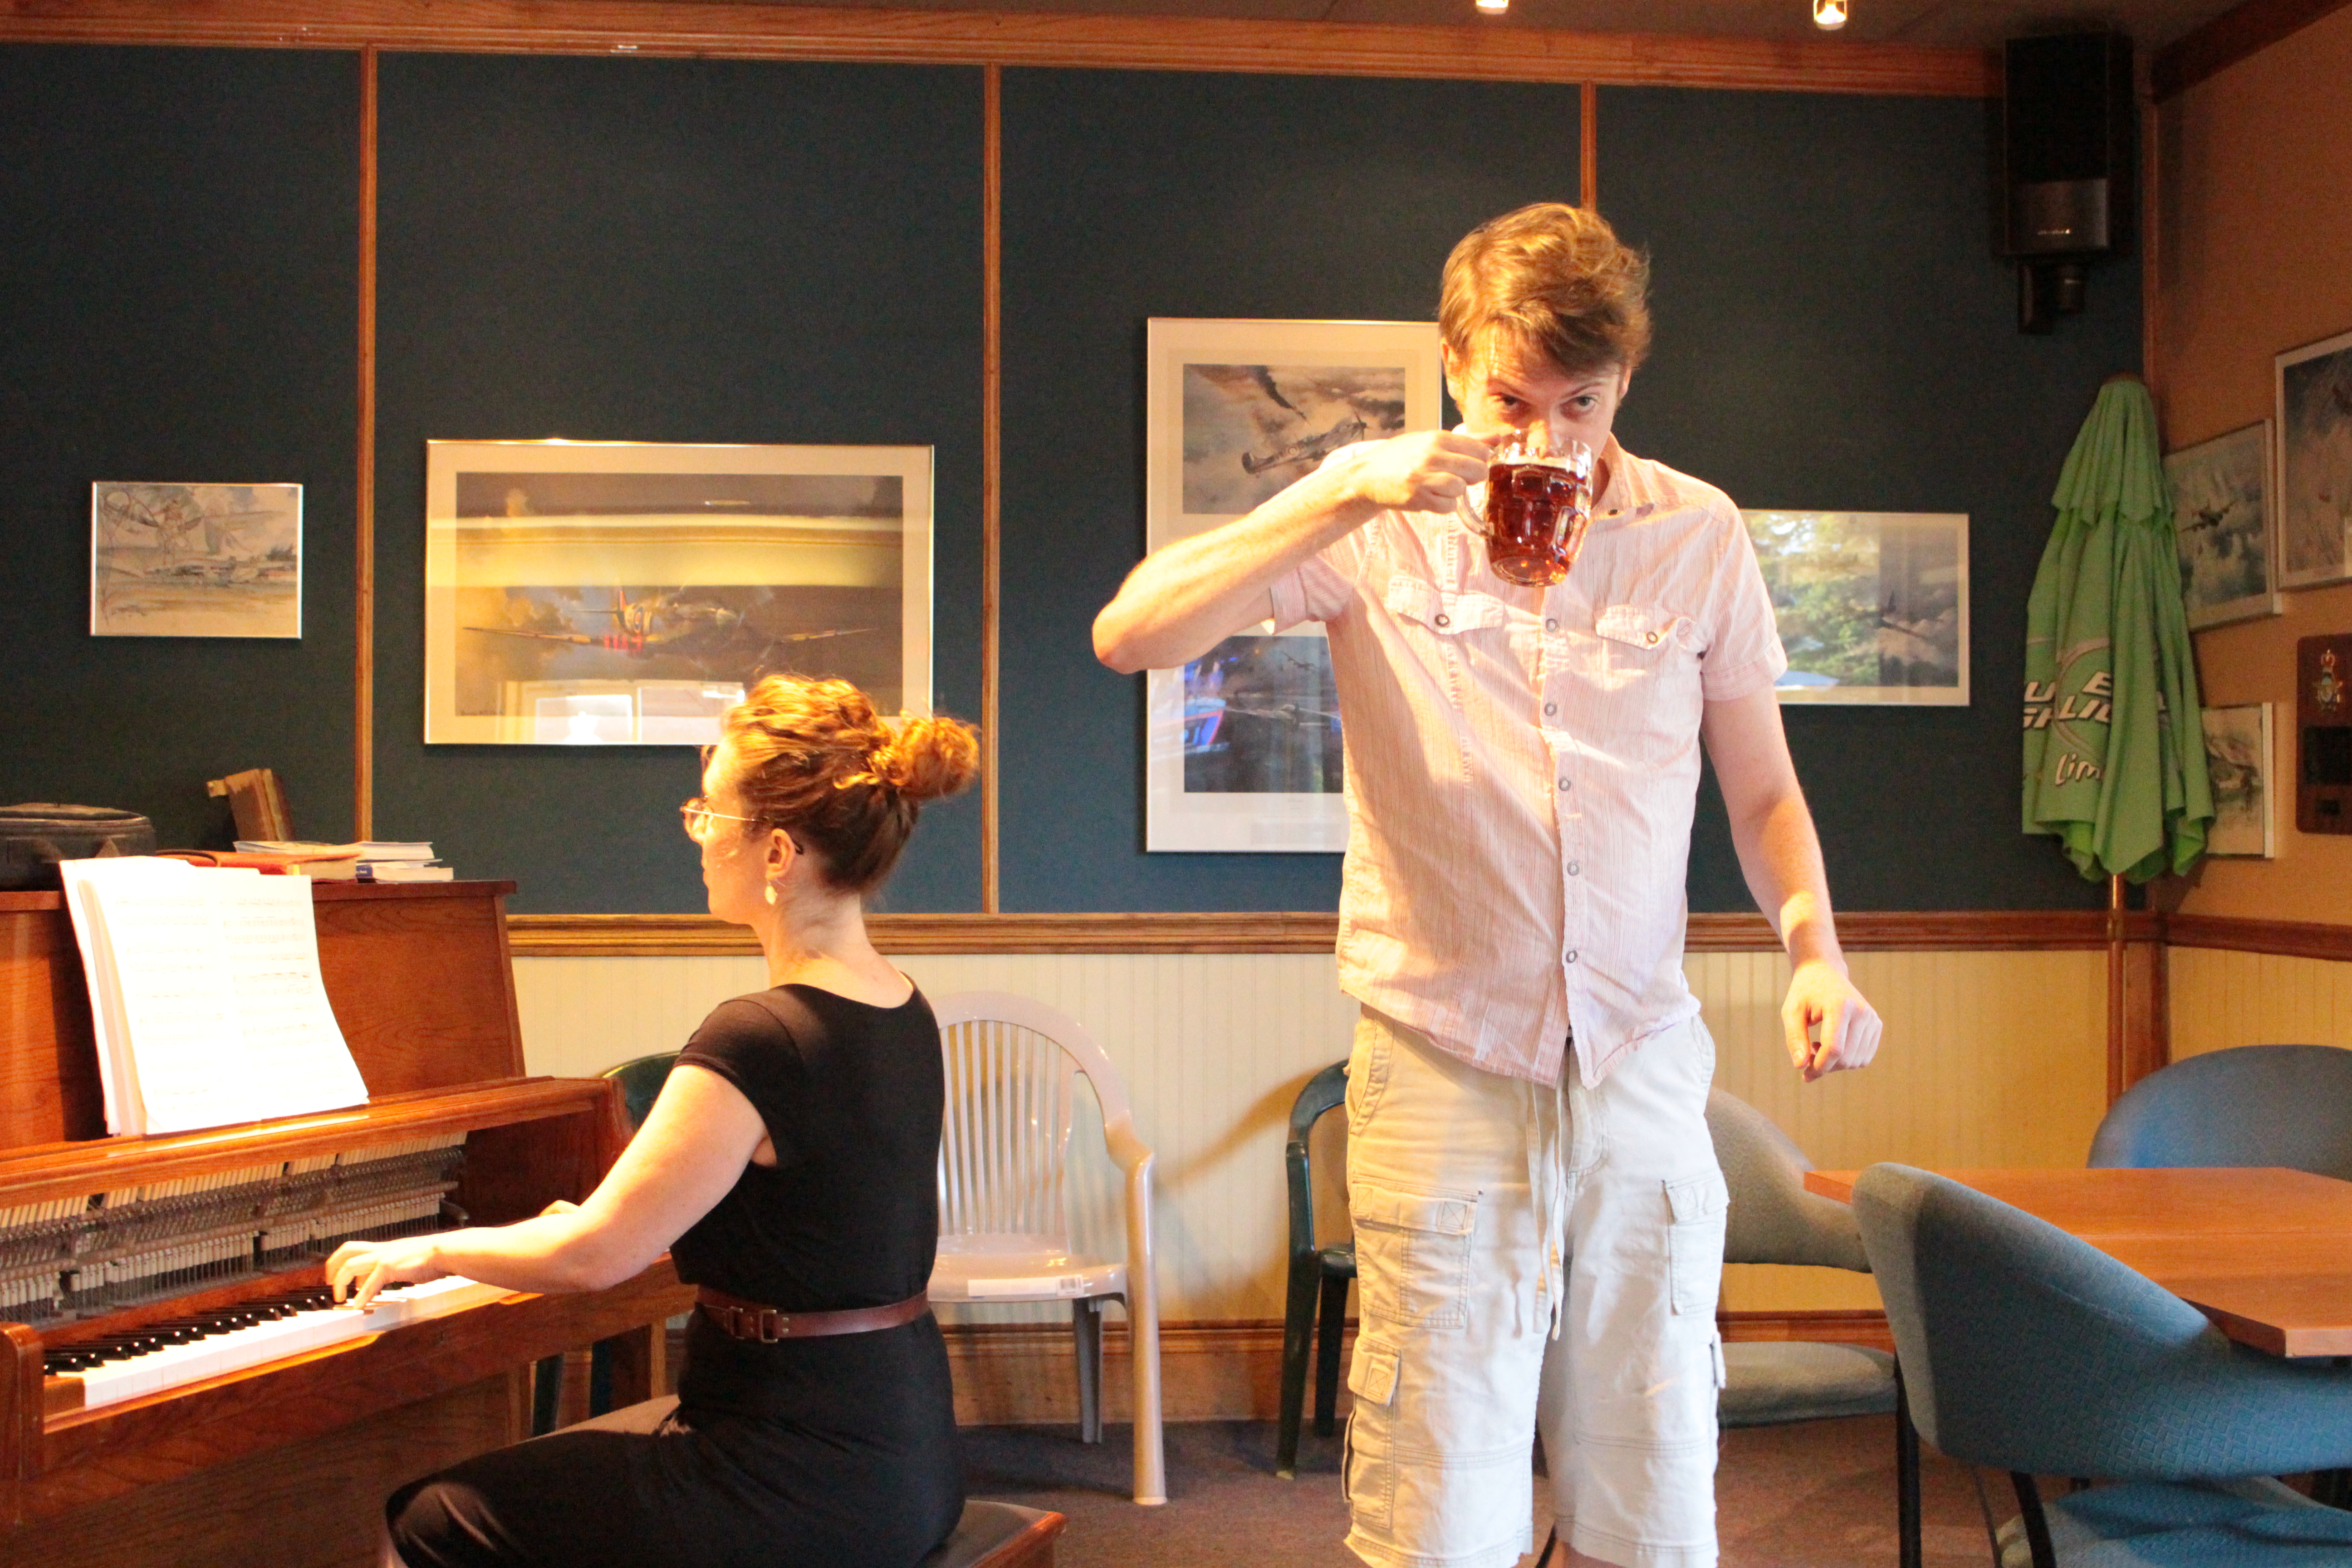 Woman plays piano while standing man takes a drink